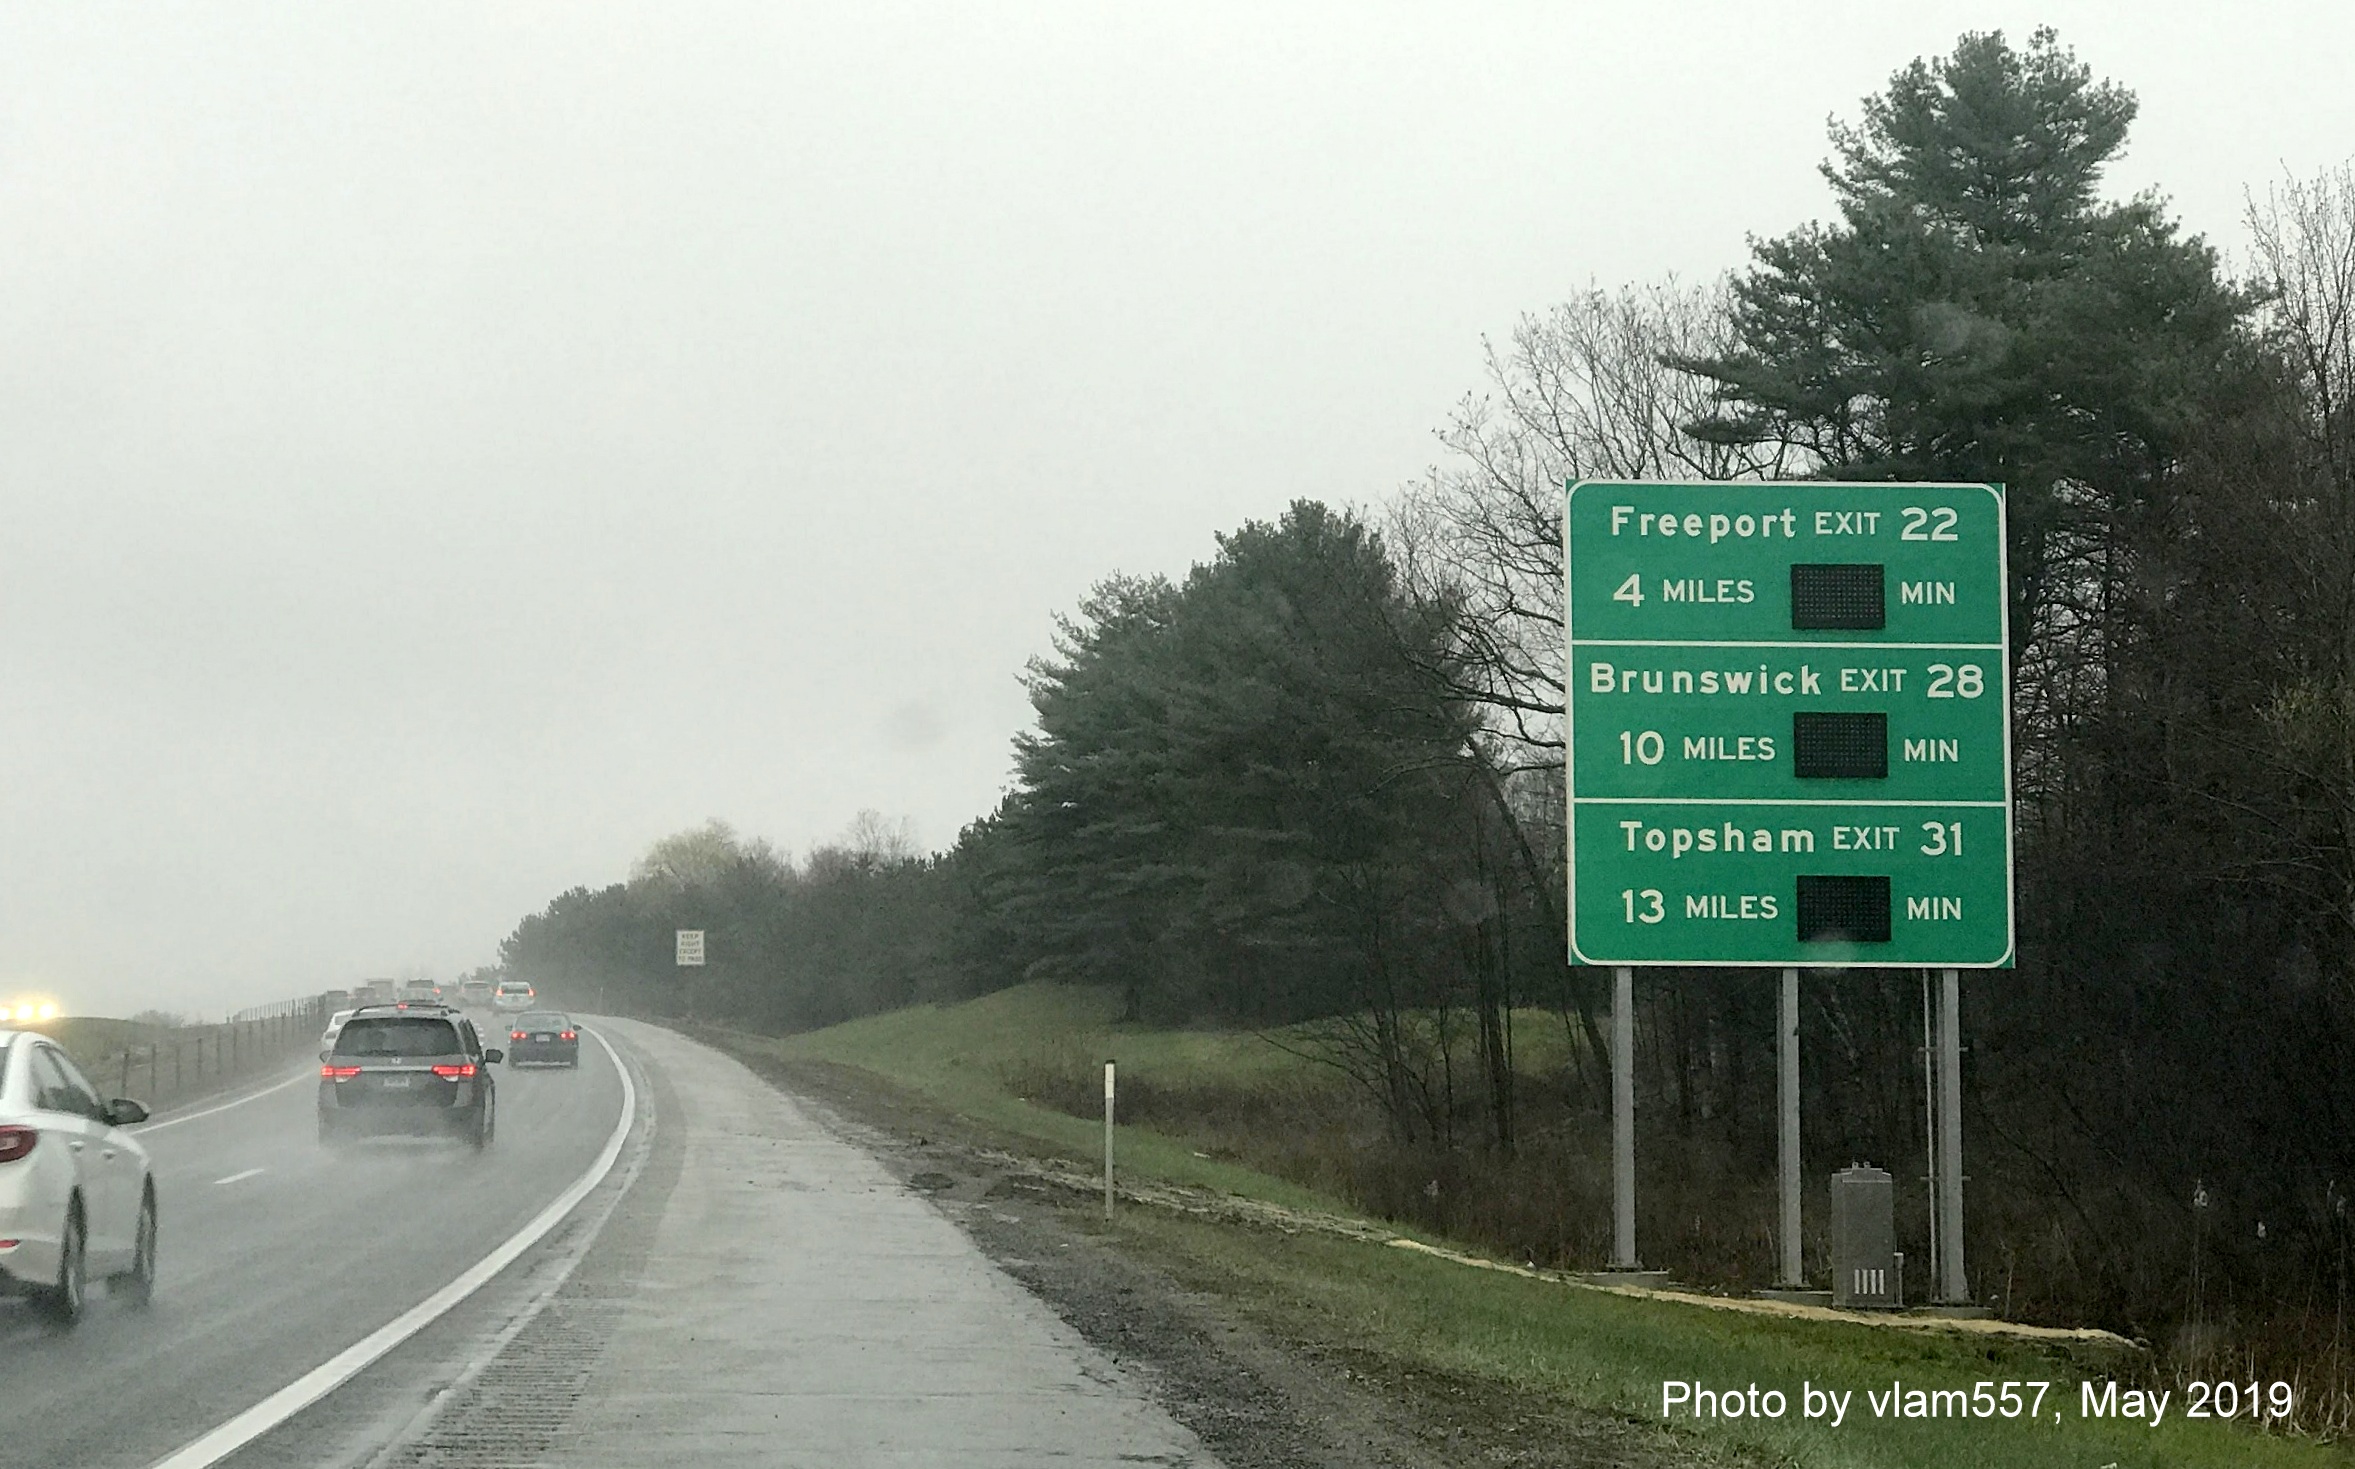 Image of newly installed travel time sign on I-295 North after exit 17, by vlam557